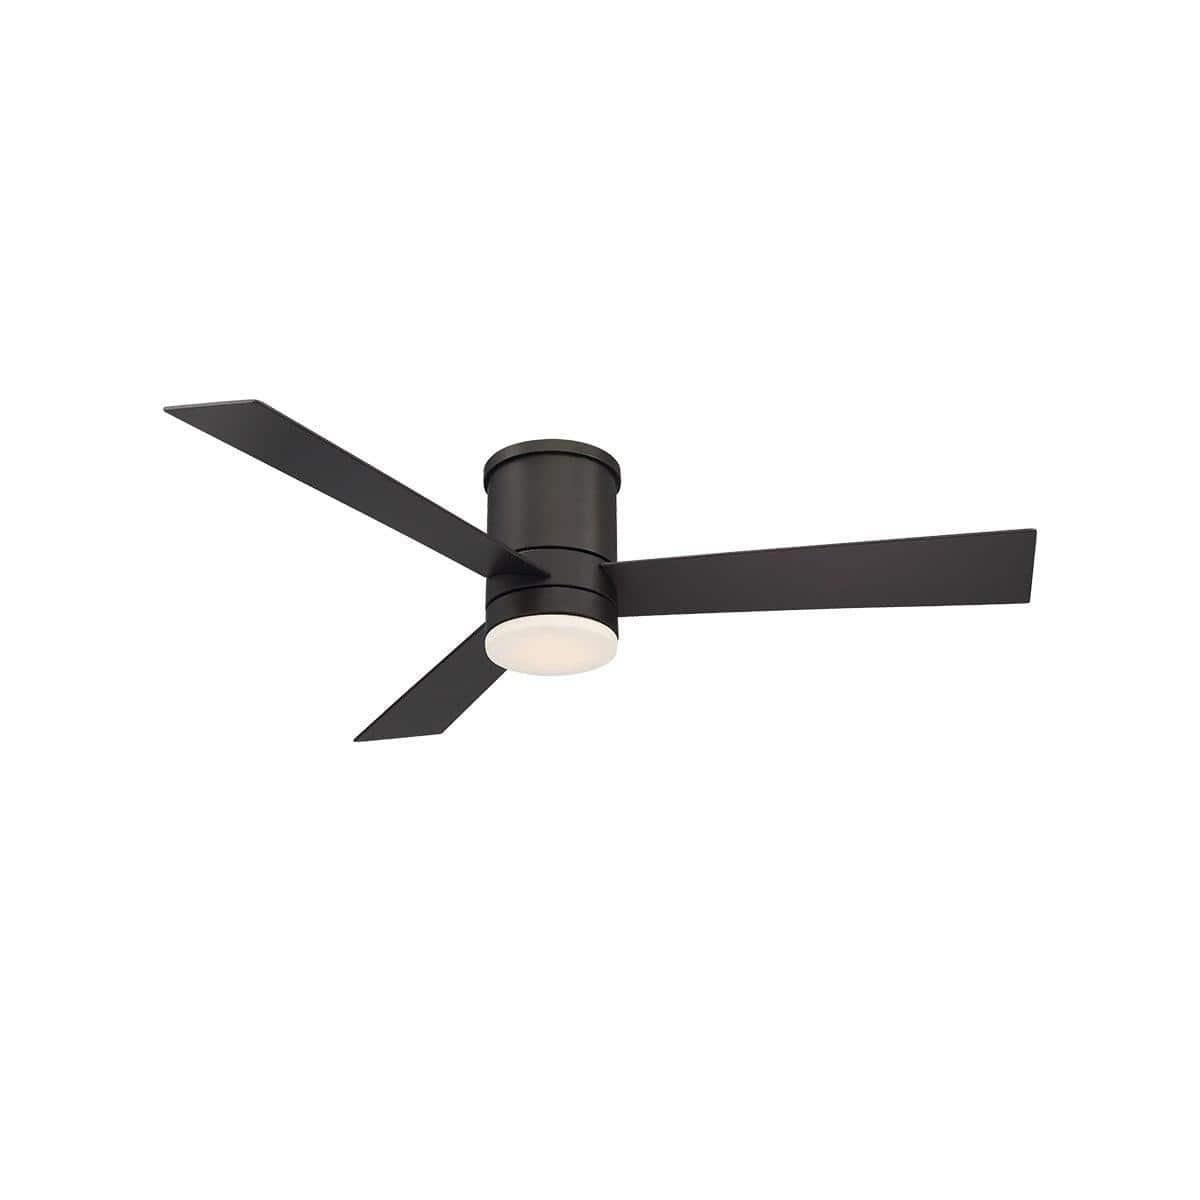 Modern Forms - Axis Flush Ceiling Fan - FH-W1803-52L-27-MB | Montreal Lighting & Hardware